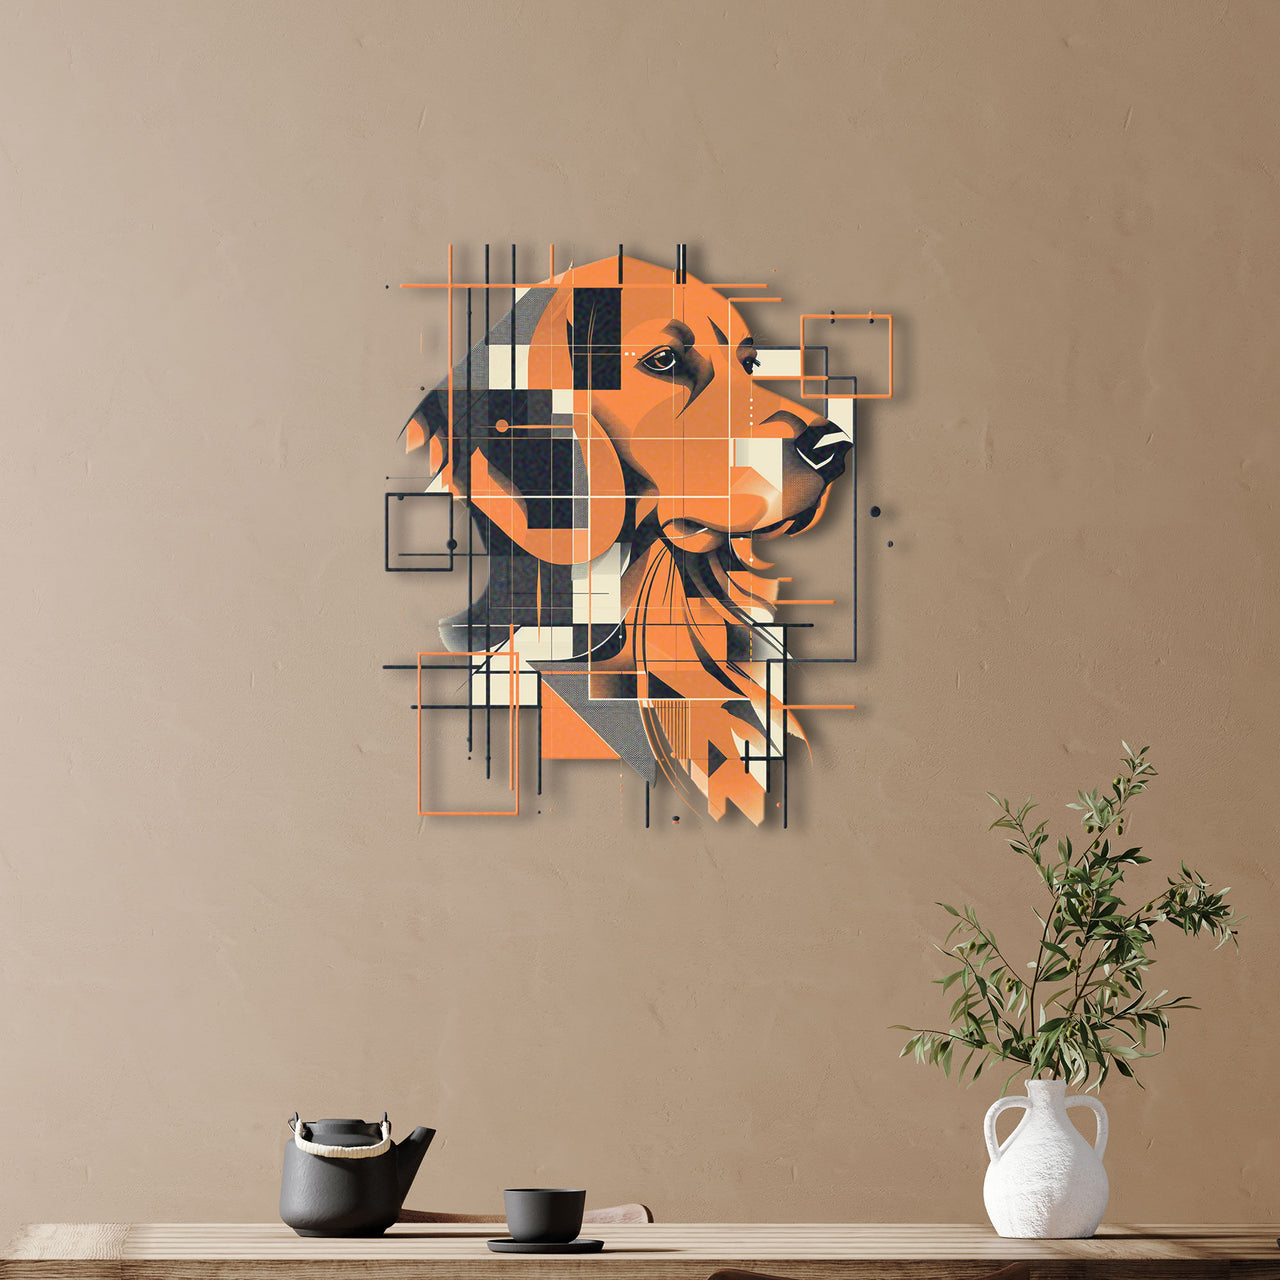 Abstract Golden Retriever Metal Wall Art, Gift for Dog Lovers, Perfect for Dog Enthusiasts